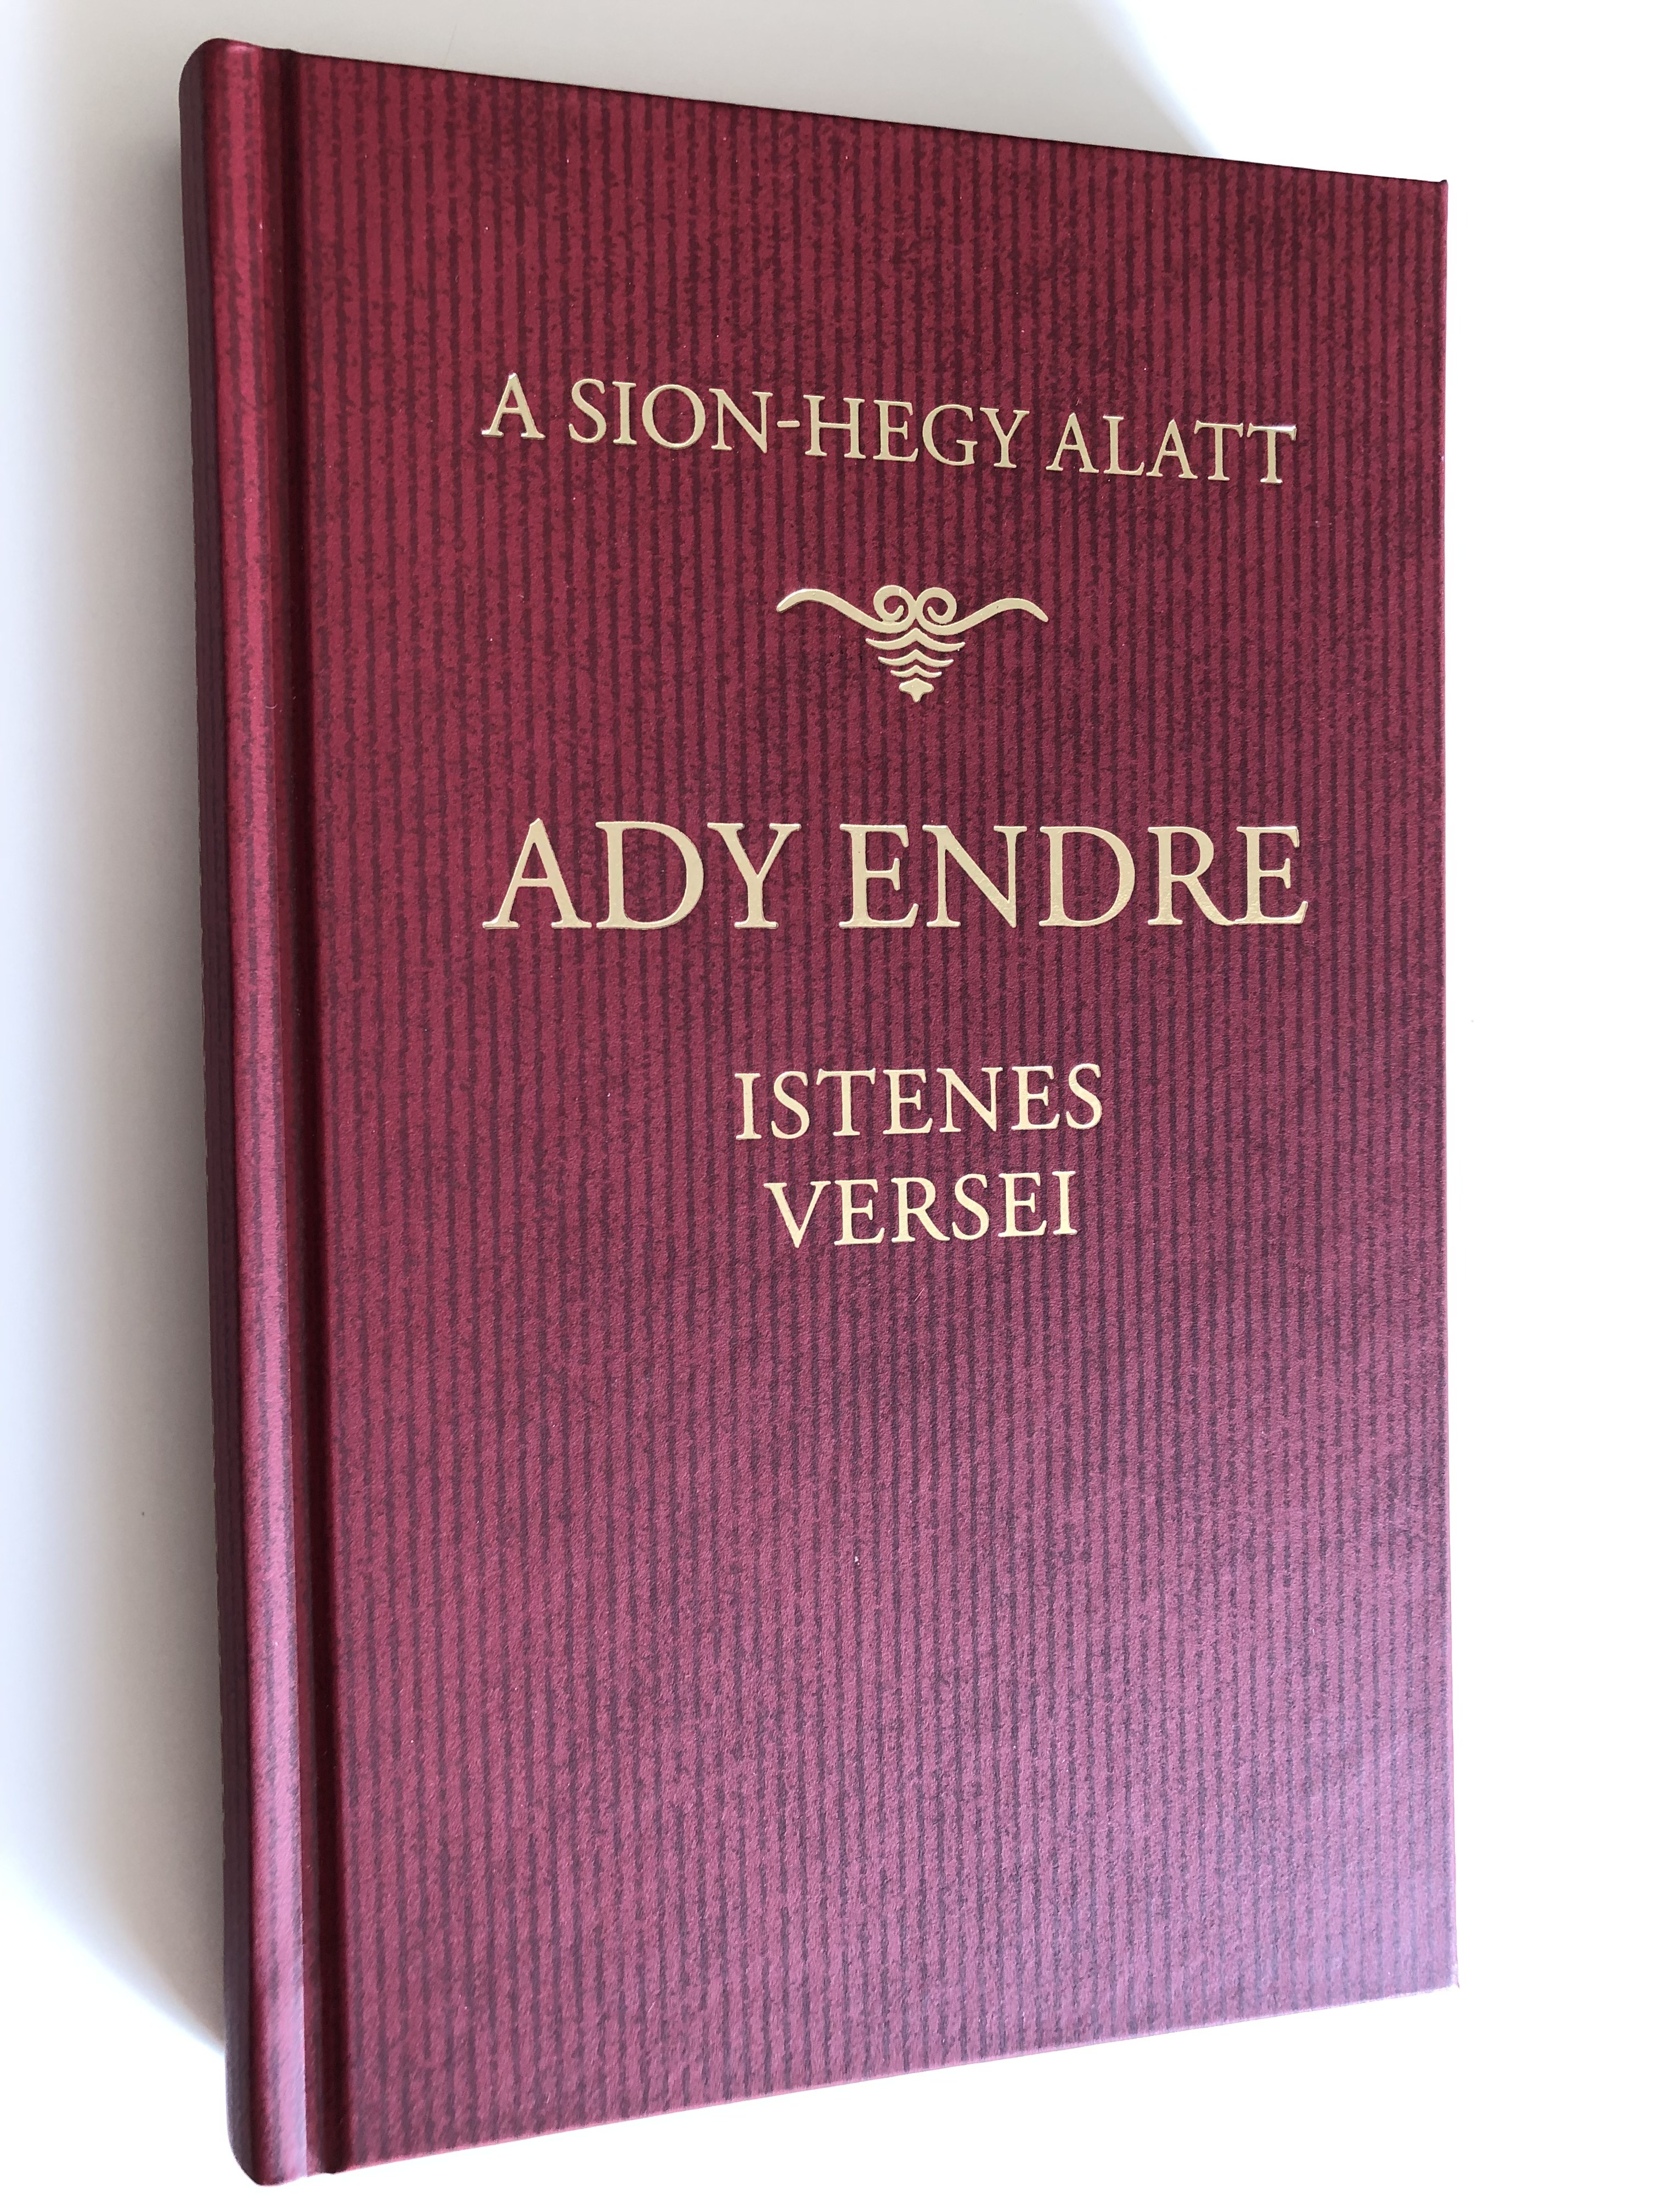 a-sion-hegy-alatt-by-ady-endre-ady-endre-istenes-versei-ady-endre-s-poems-about-god-editor-szab-l-rinc-szent-istv-n-t-rsulat-hardcover-2019-1-.jpg